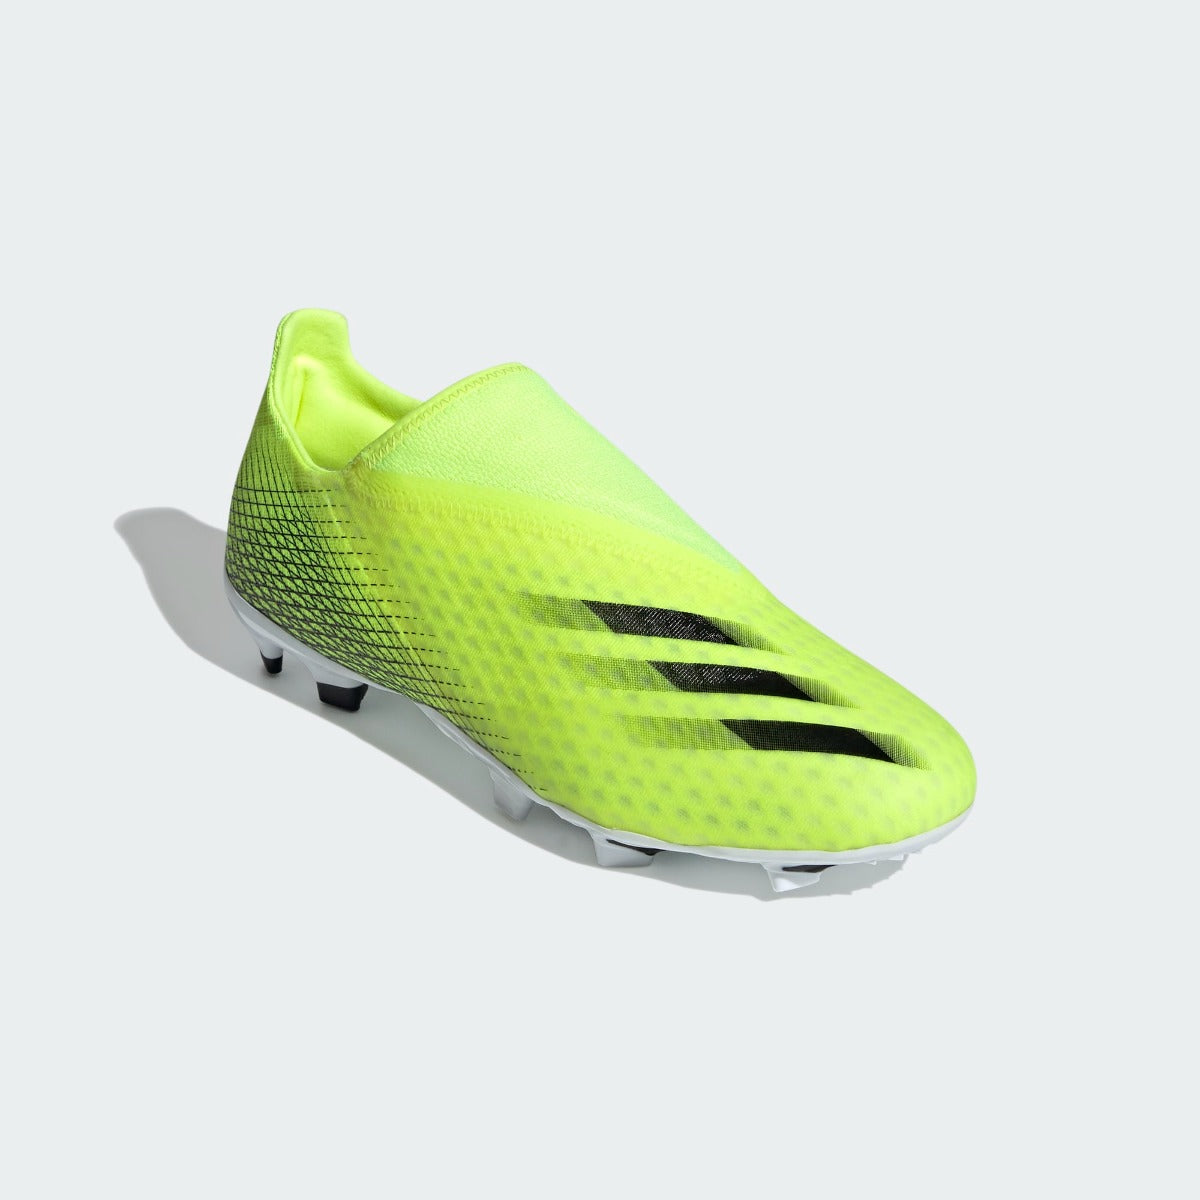 Adidas X Ghosted .3 Laceless FG - Volt-Black